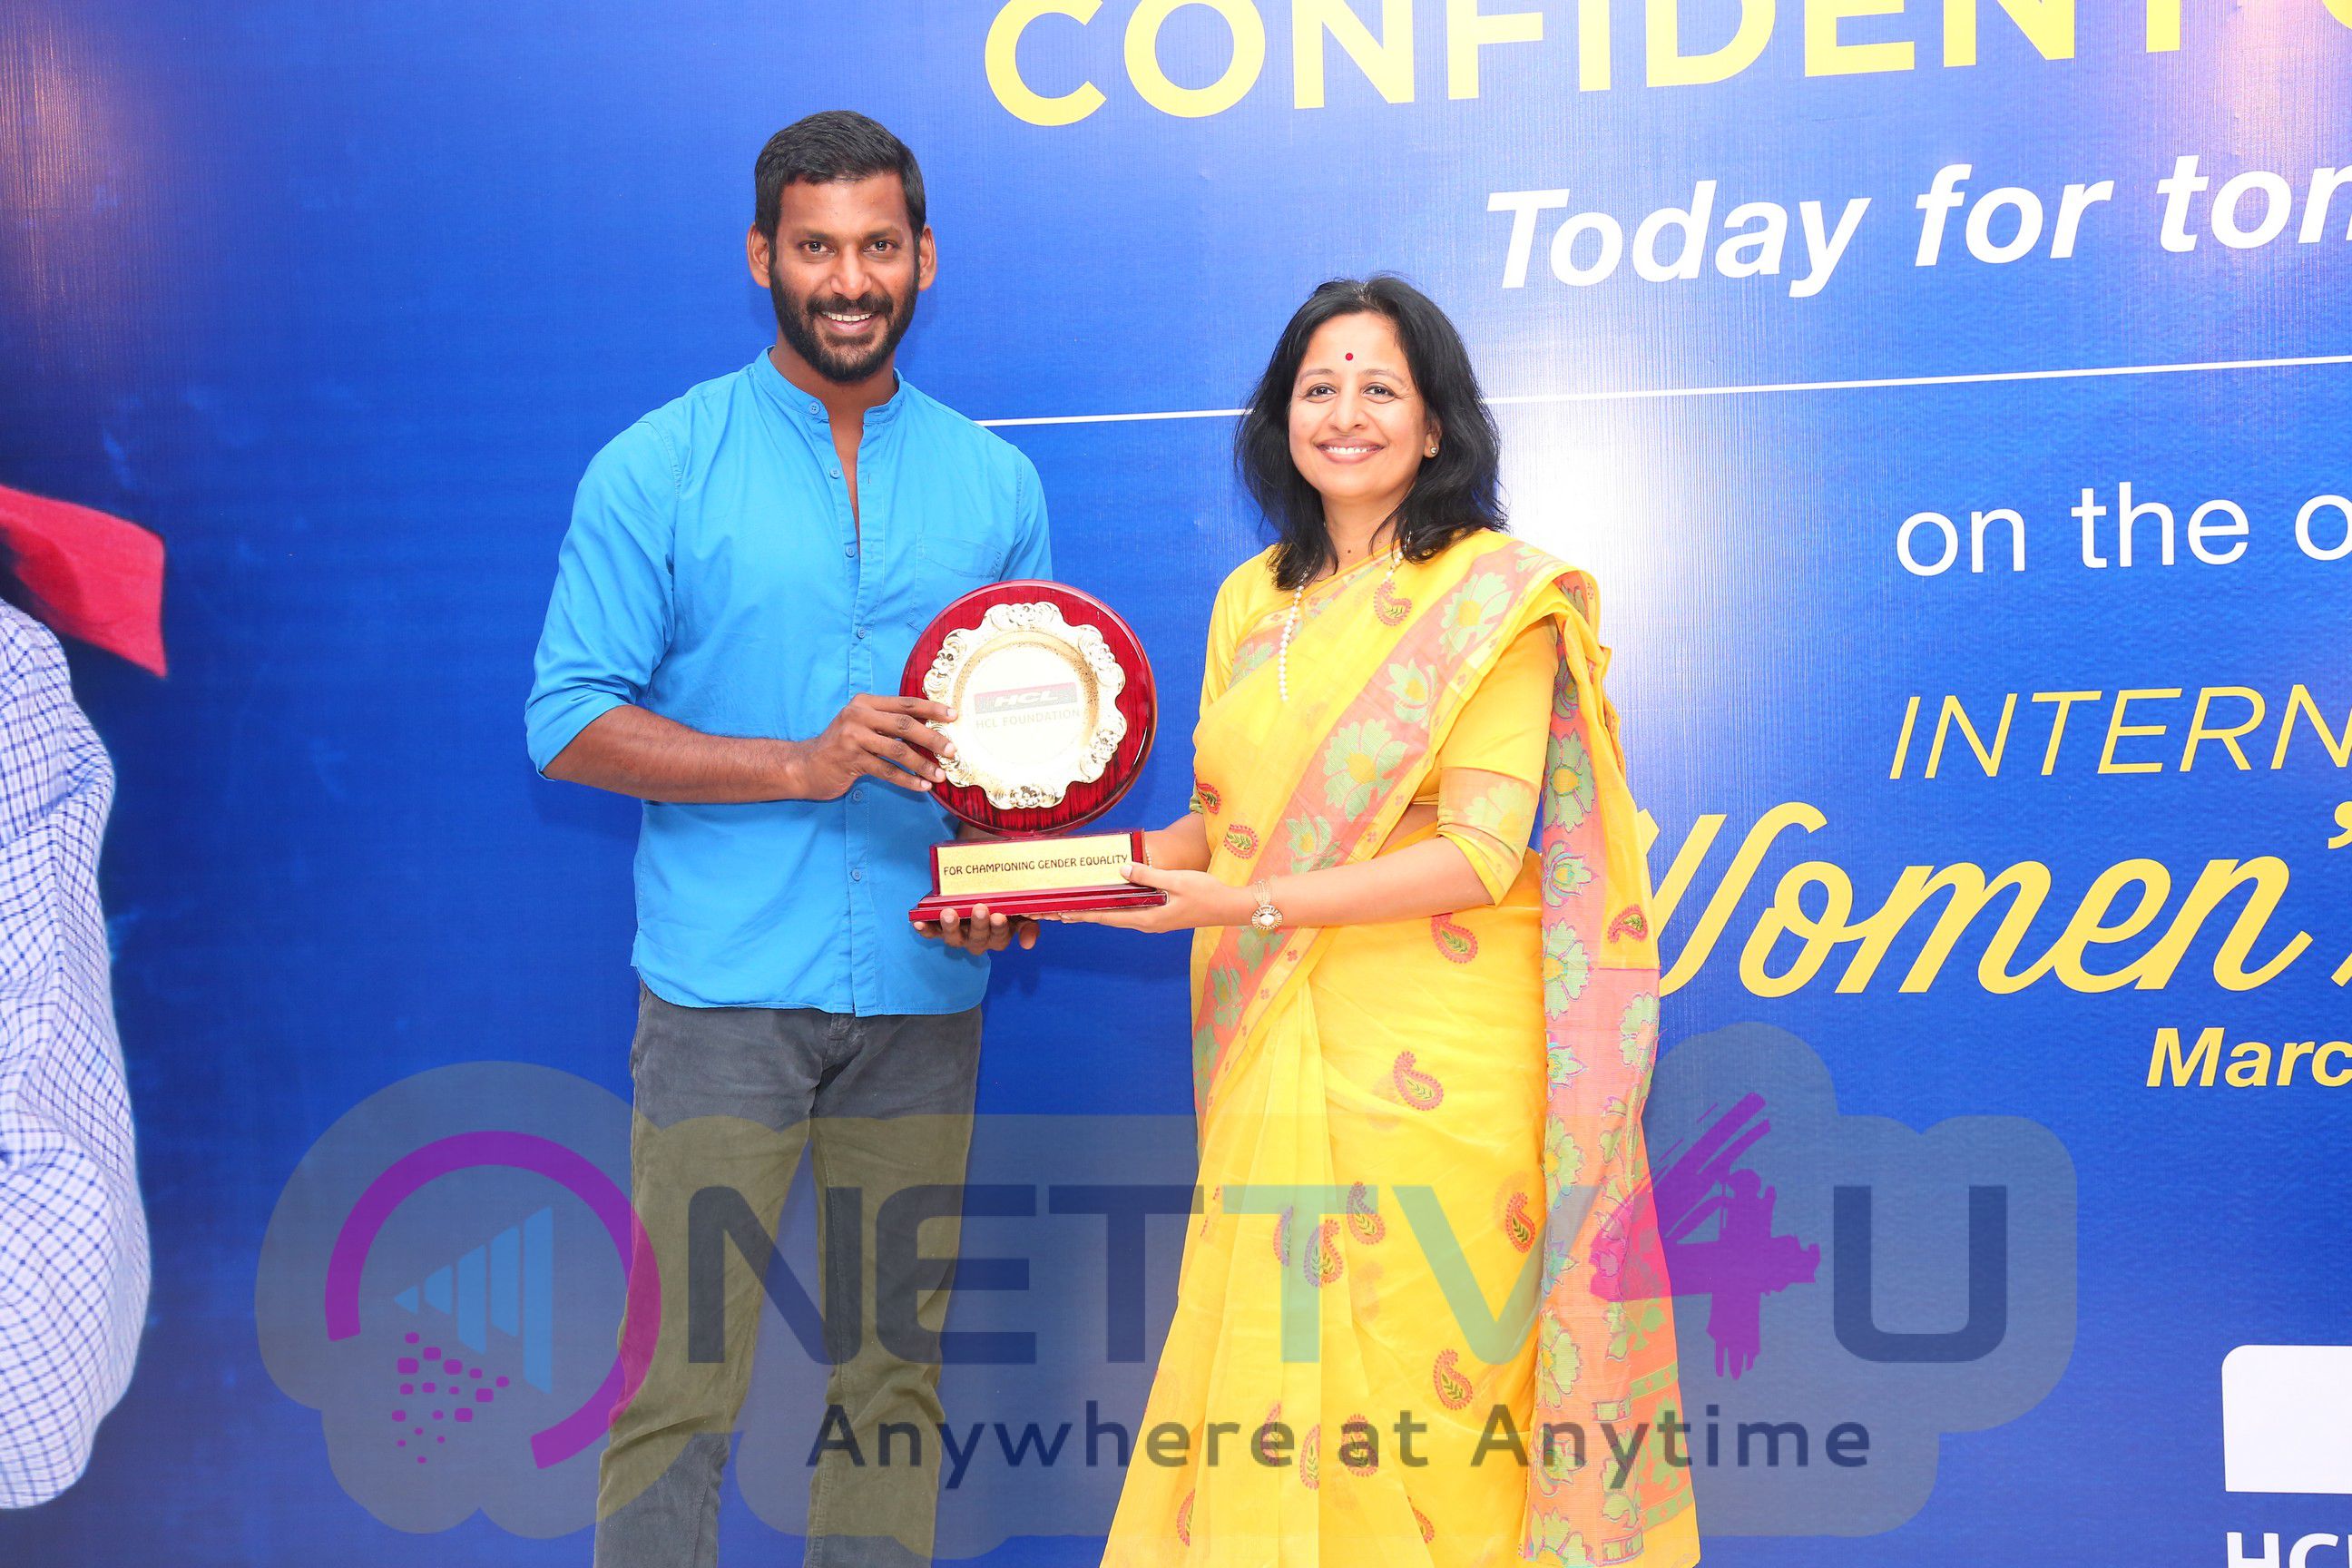 Vishal Launched HCL Confident Girls Today For Tomorrow Regarding Women's Day  Tamil Gallery